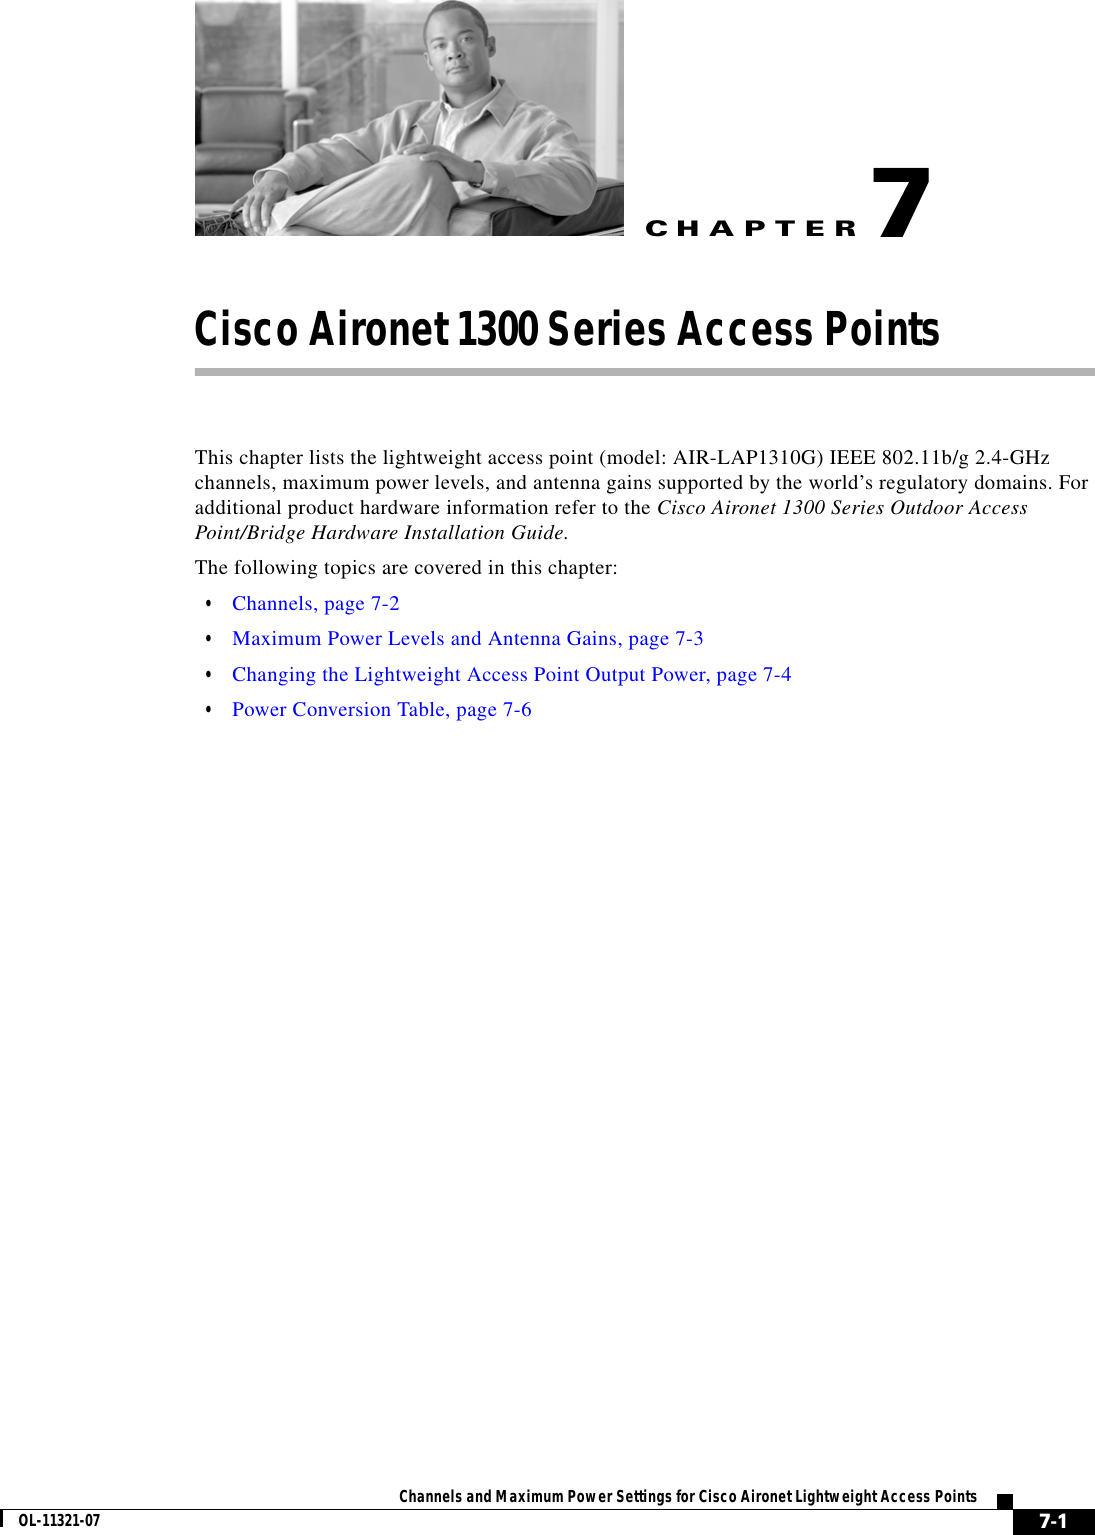 CHAPTER 7-1Channels and Maximum Power Settings for Cisco Aironet Lightweight Access PointsOL-11321-077Cisco Aironet 1300 Series Access Points This chapter lists the lightweight access point (model: AIR-LAP1310G) IEEE 802.11b/g 2.4-GHz channels, maximum power levels, and antenna gains supported by the world’s regulatory domains. For additional product hardware information refer to the Cisco Aironet 1300 Series Outdoor Access Point/Bridge Hardware Installation Guide.The following topics are covered in this chapter:  • Channels, page 7-2  • Maximum Power Levels and Antenna Gains, page 7-3  • Changing the Lightweight Access Point Output Power, page 7-4  • Power Conversion Table, page 7-6